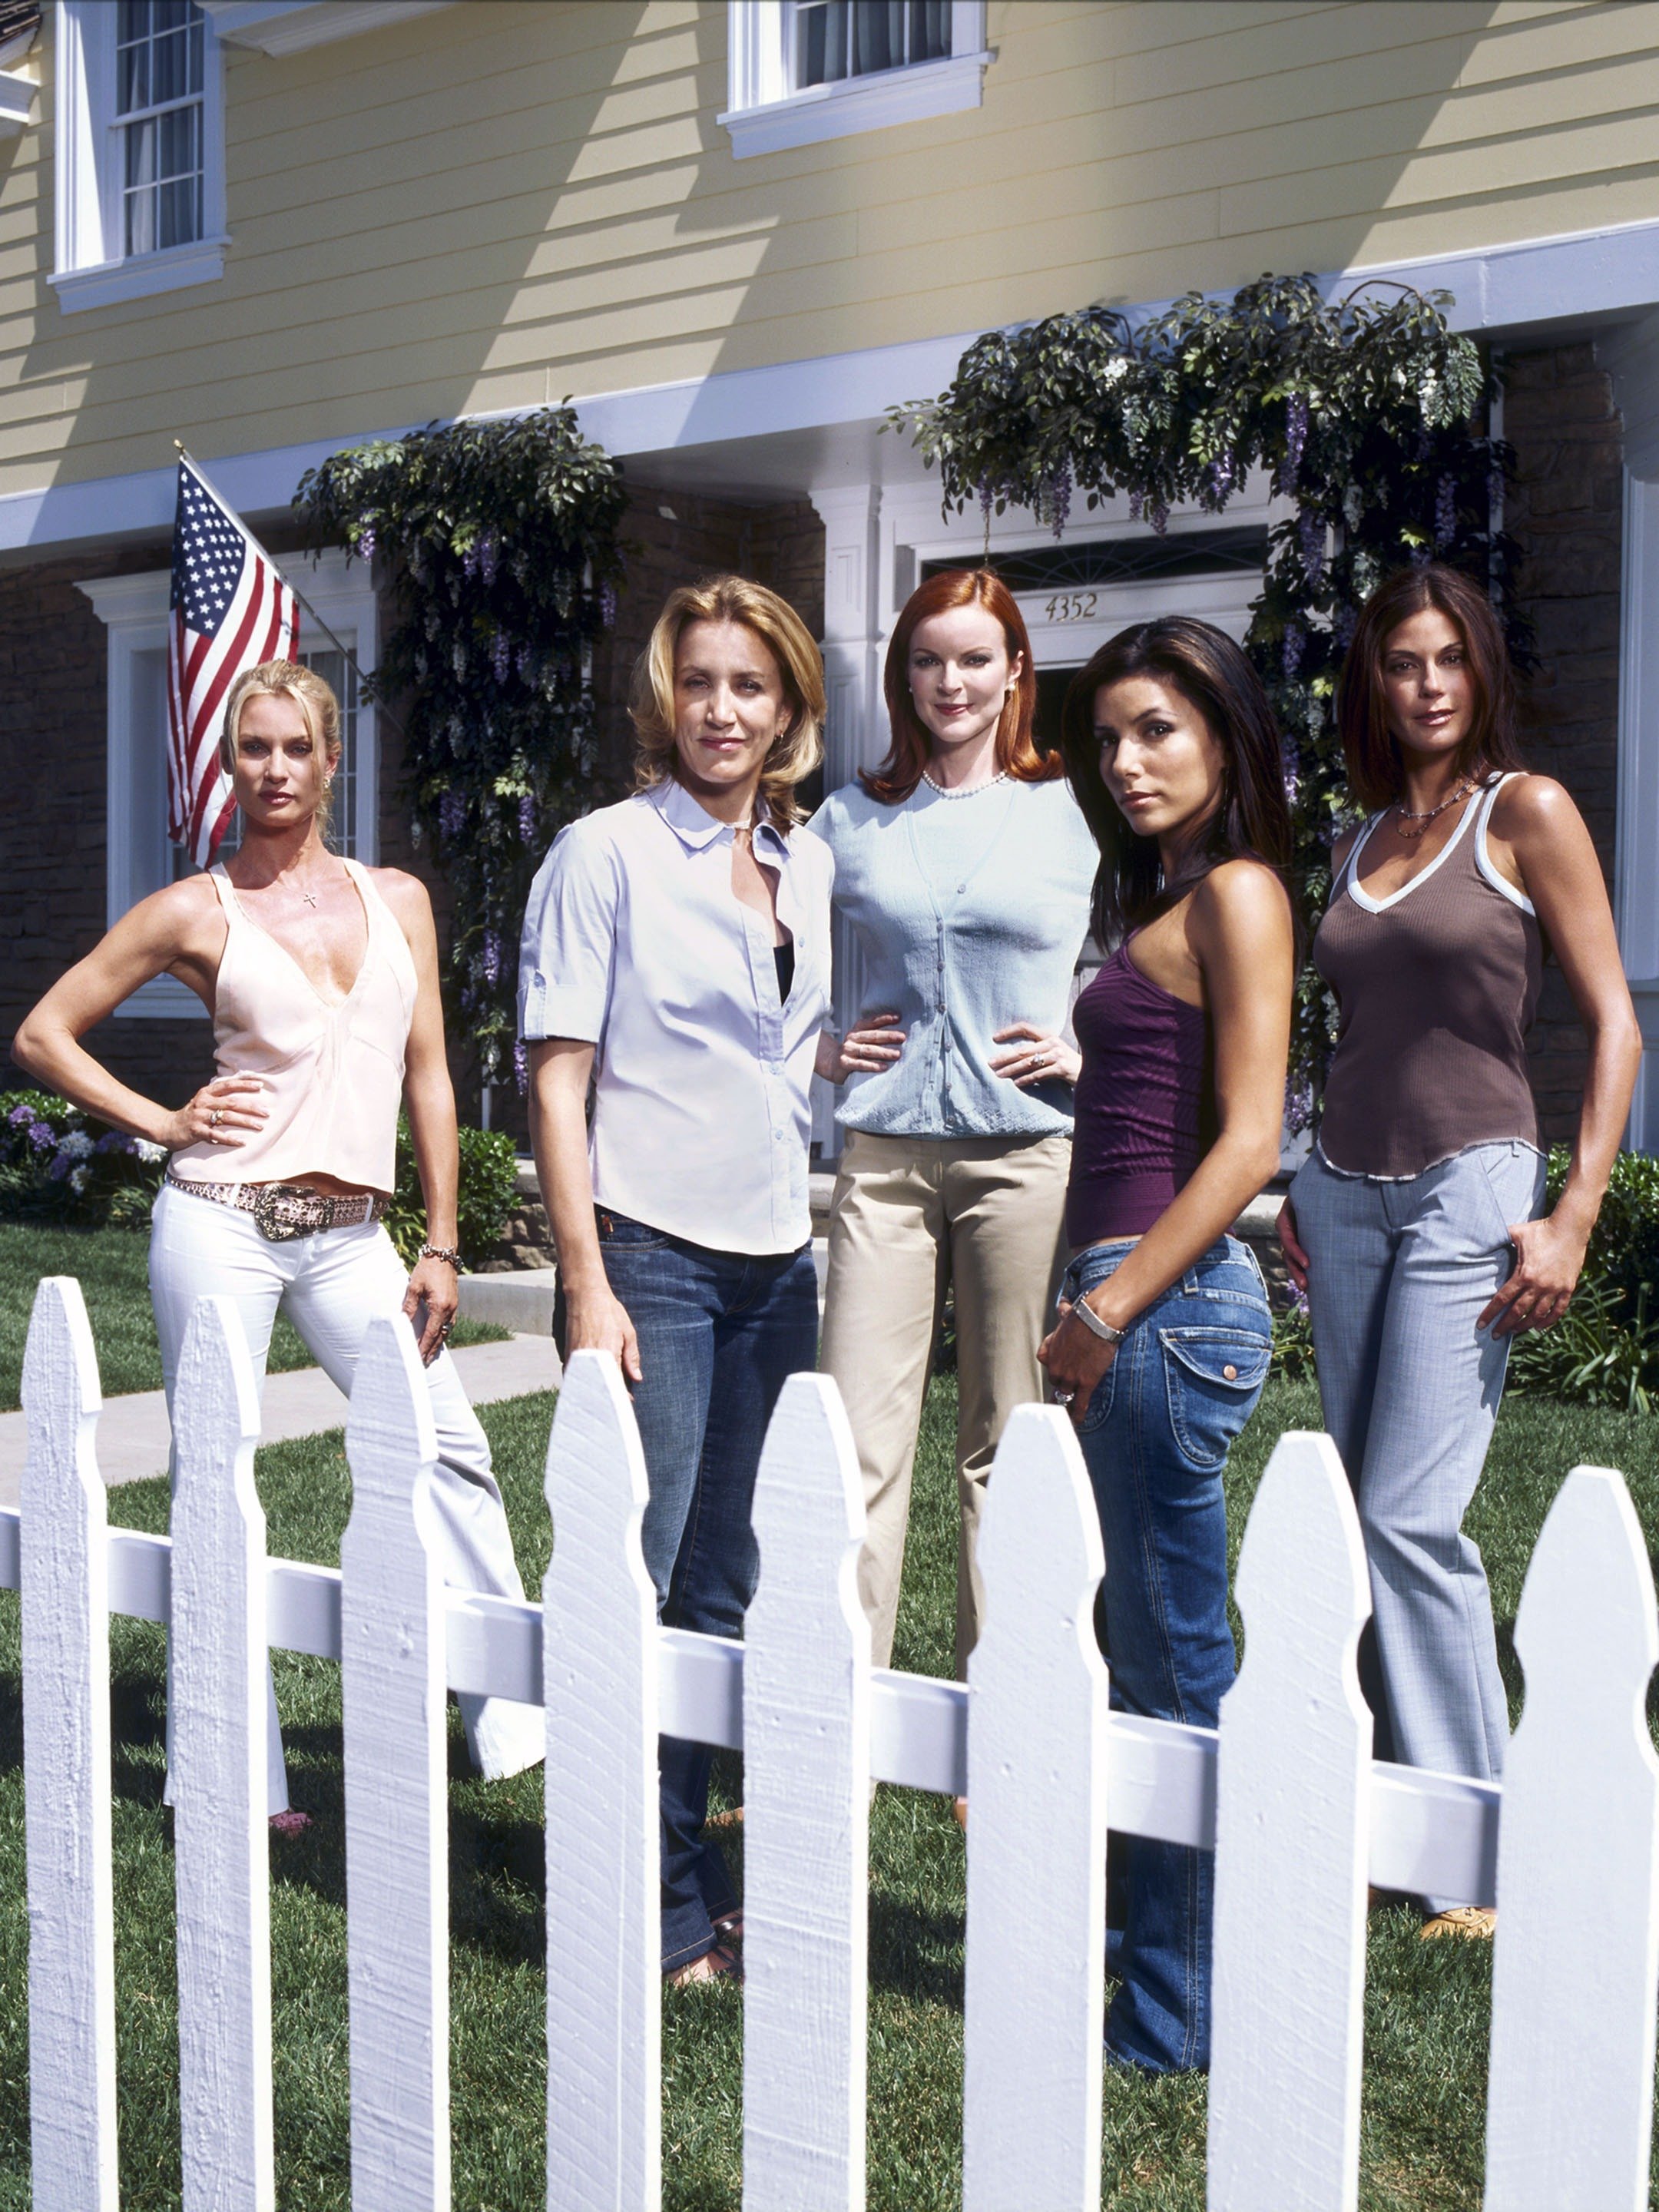 Desperate Housewives pic photo